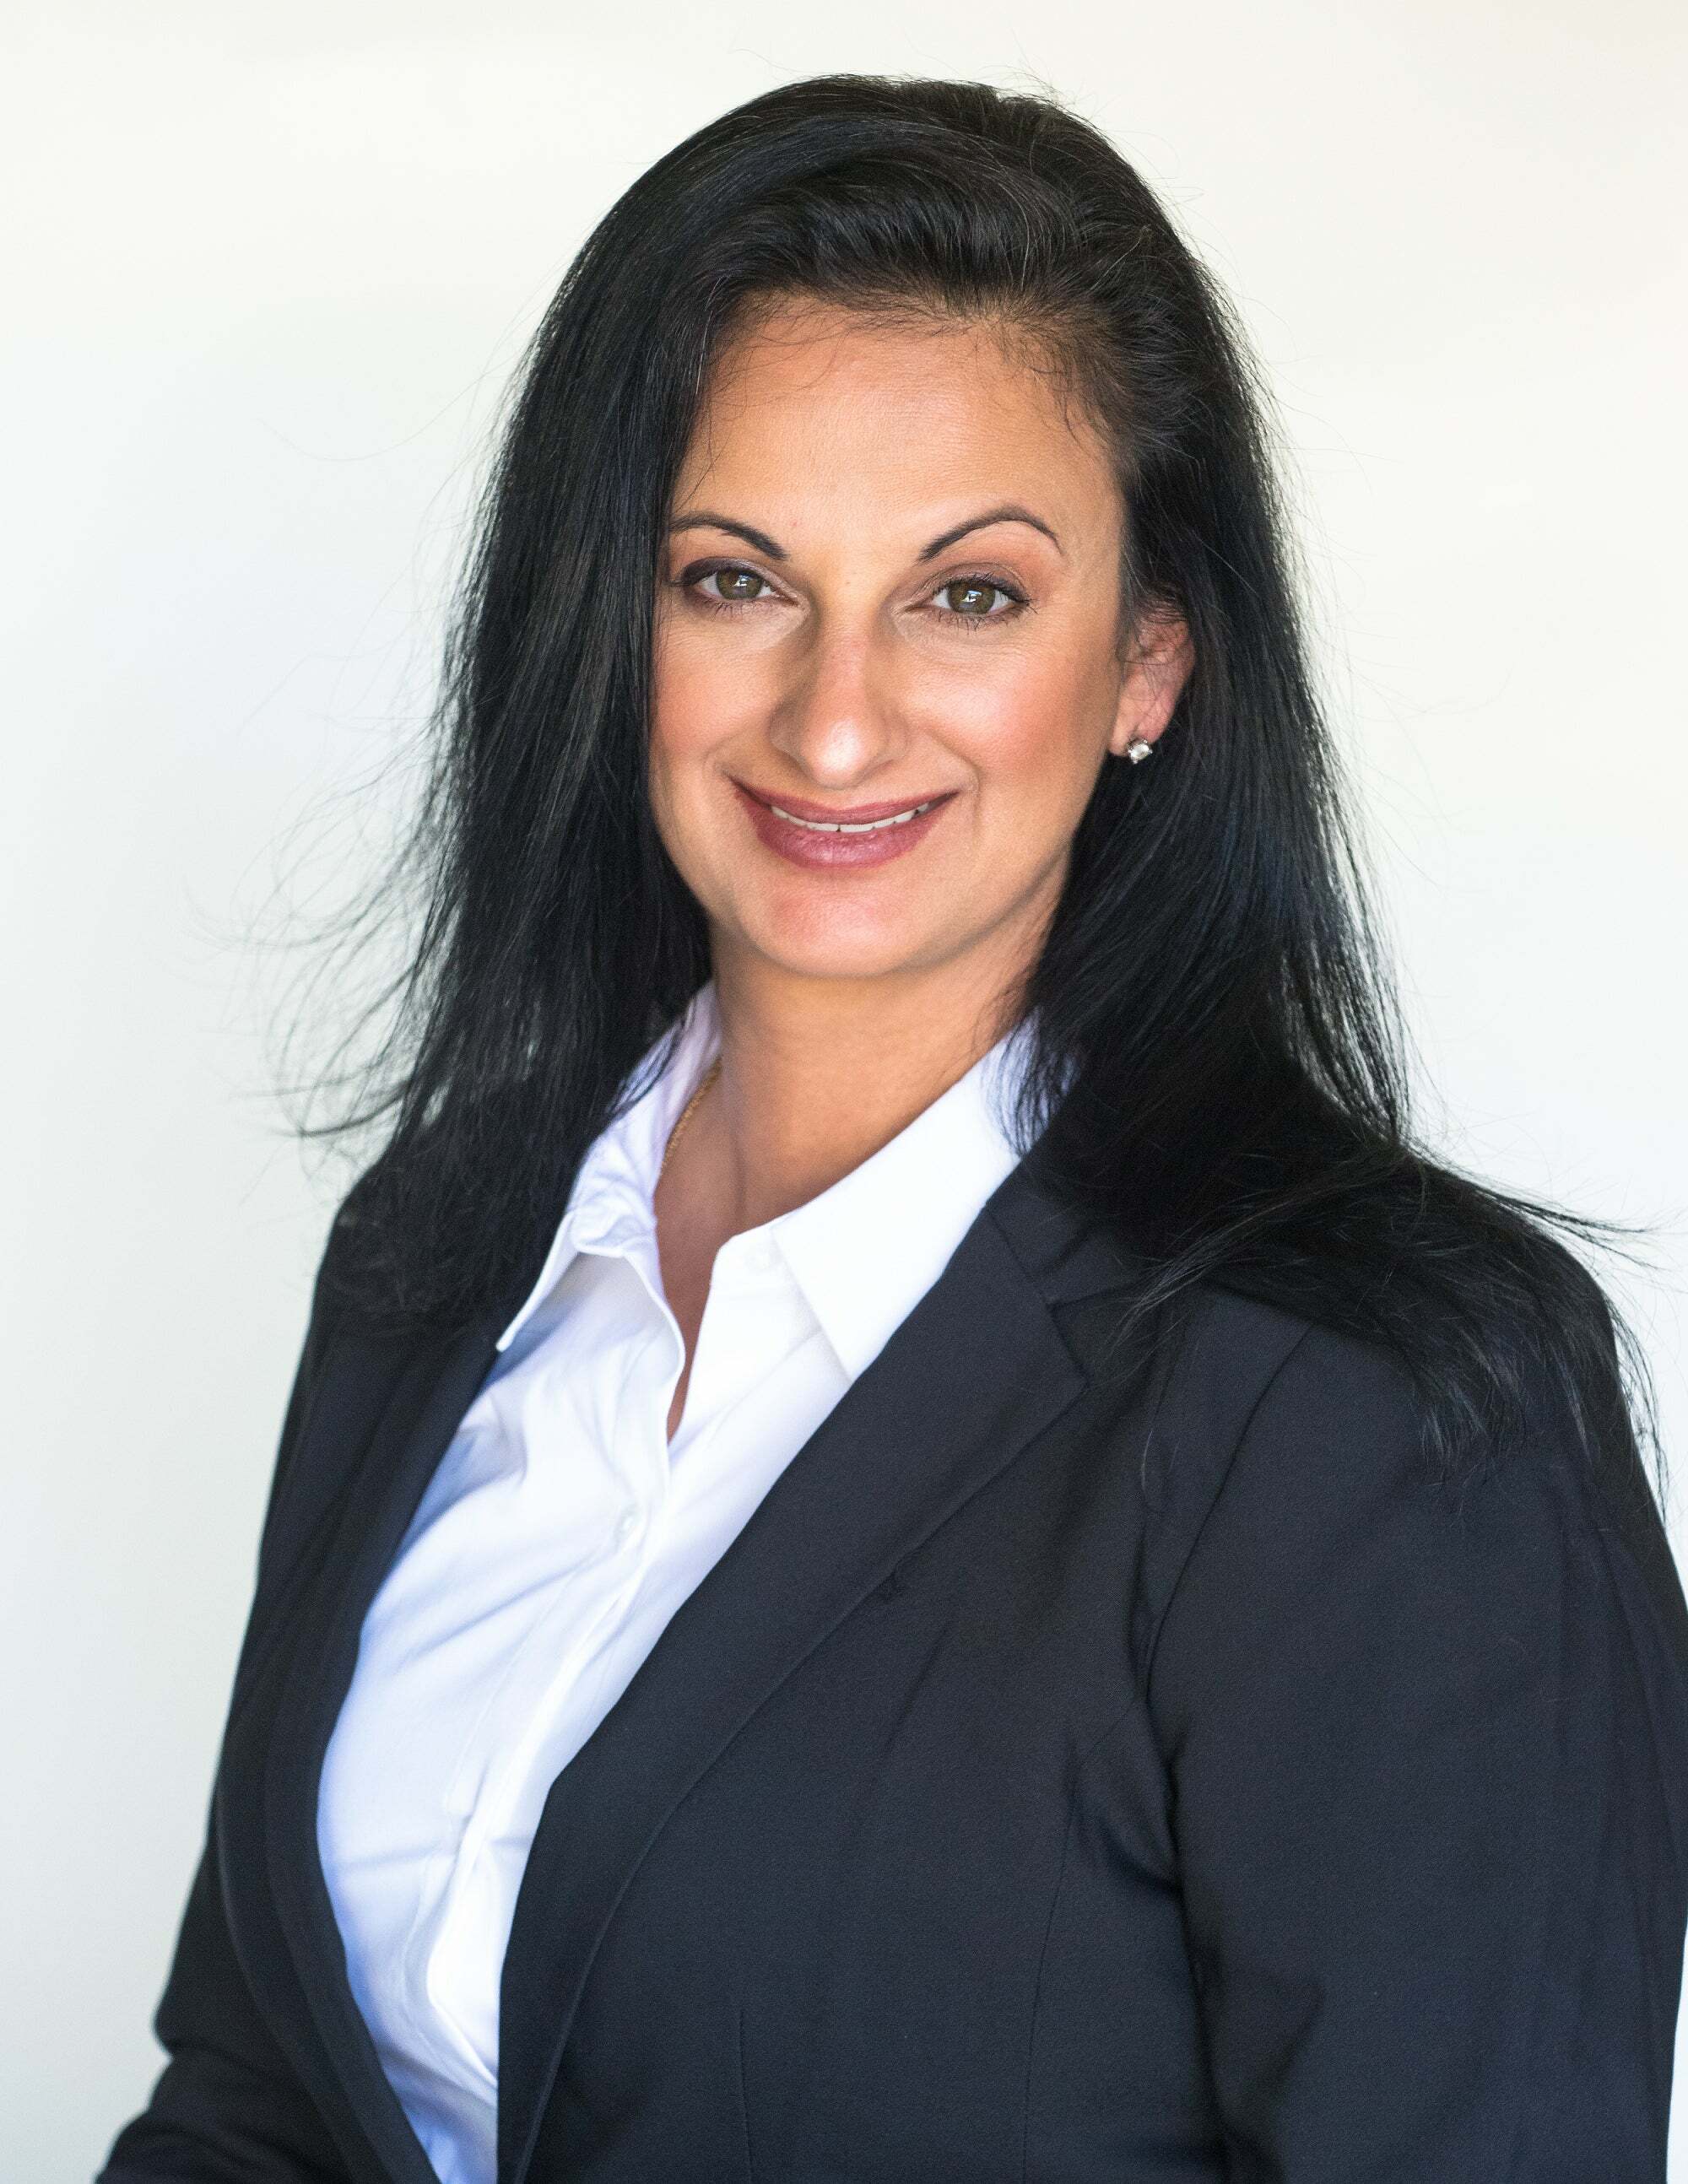 Jacqueline Arrizano, Real Estate Salesperson in Brentwood, Real Estate Alliance